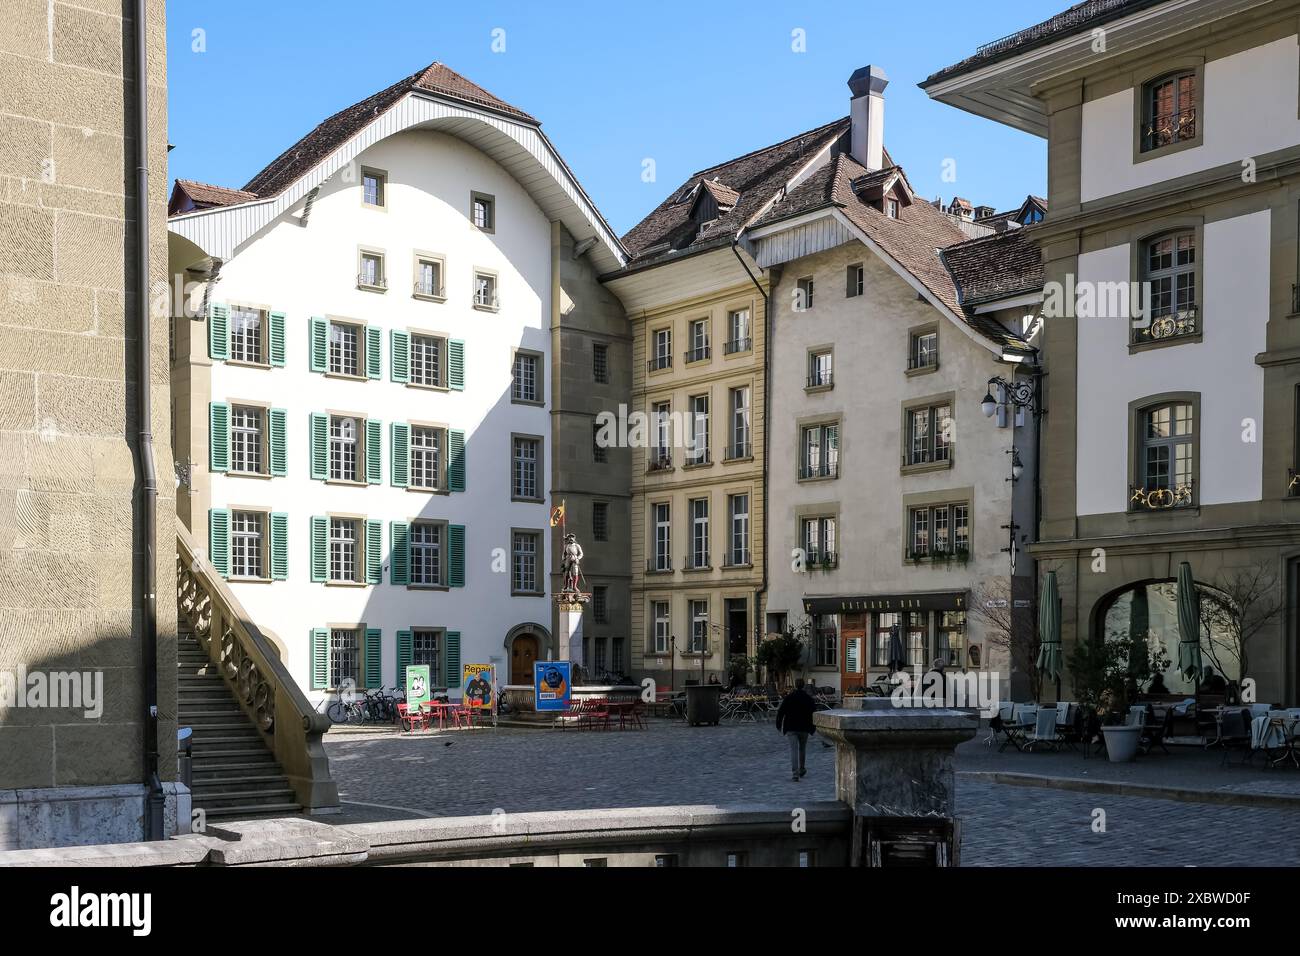 View of the Bern Town Hall square (Rathausplatz) located in the Old City, the medieval city center of Bern, Switzerland Stock Photo